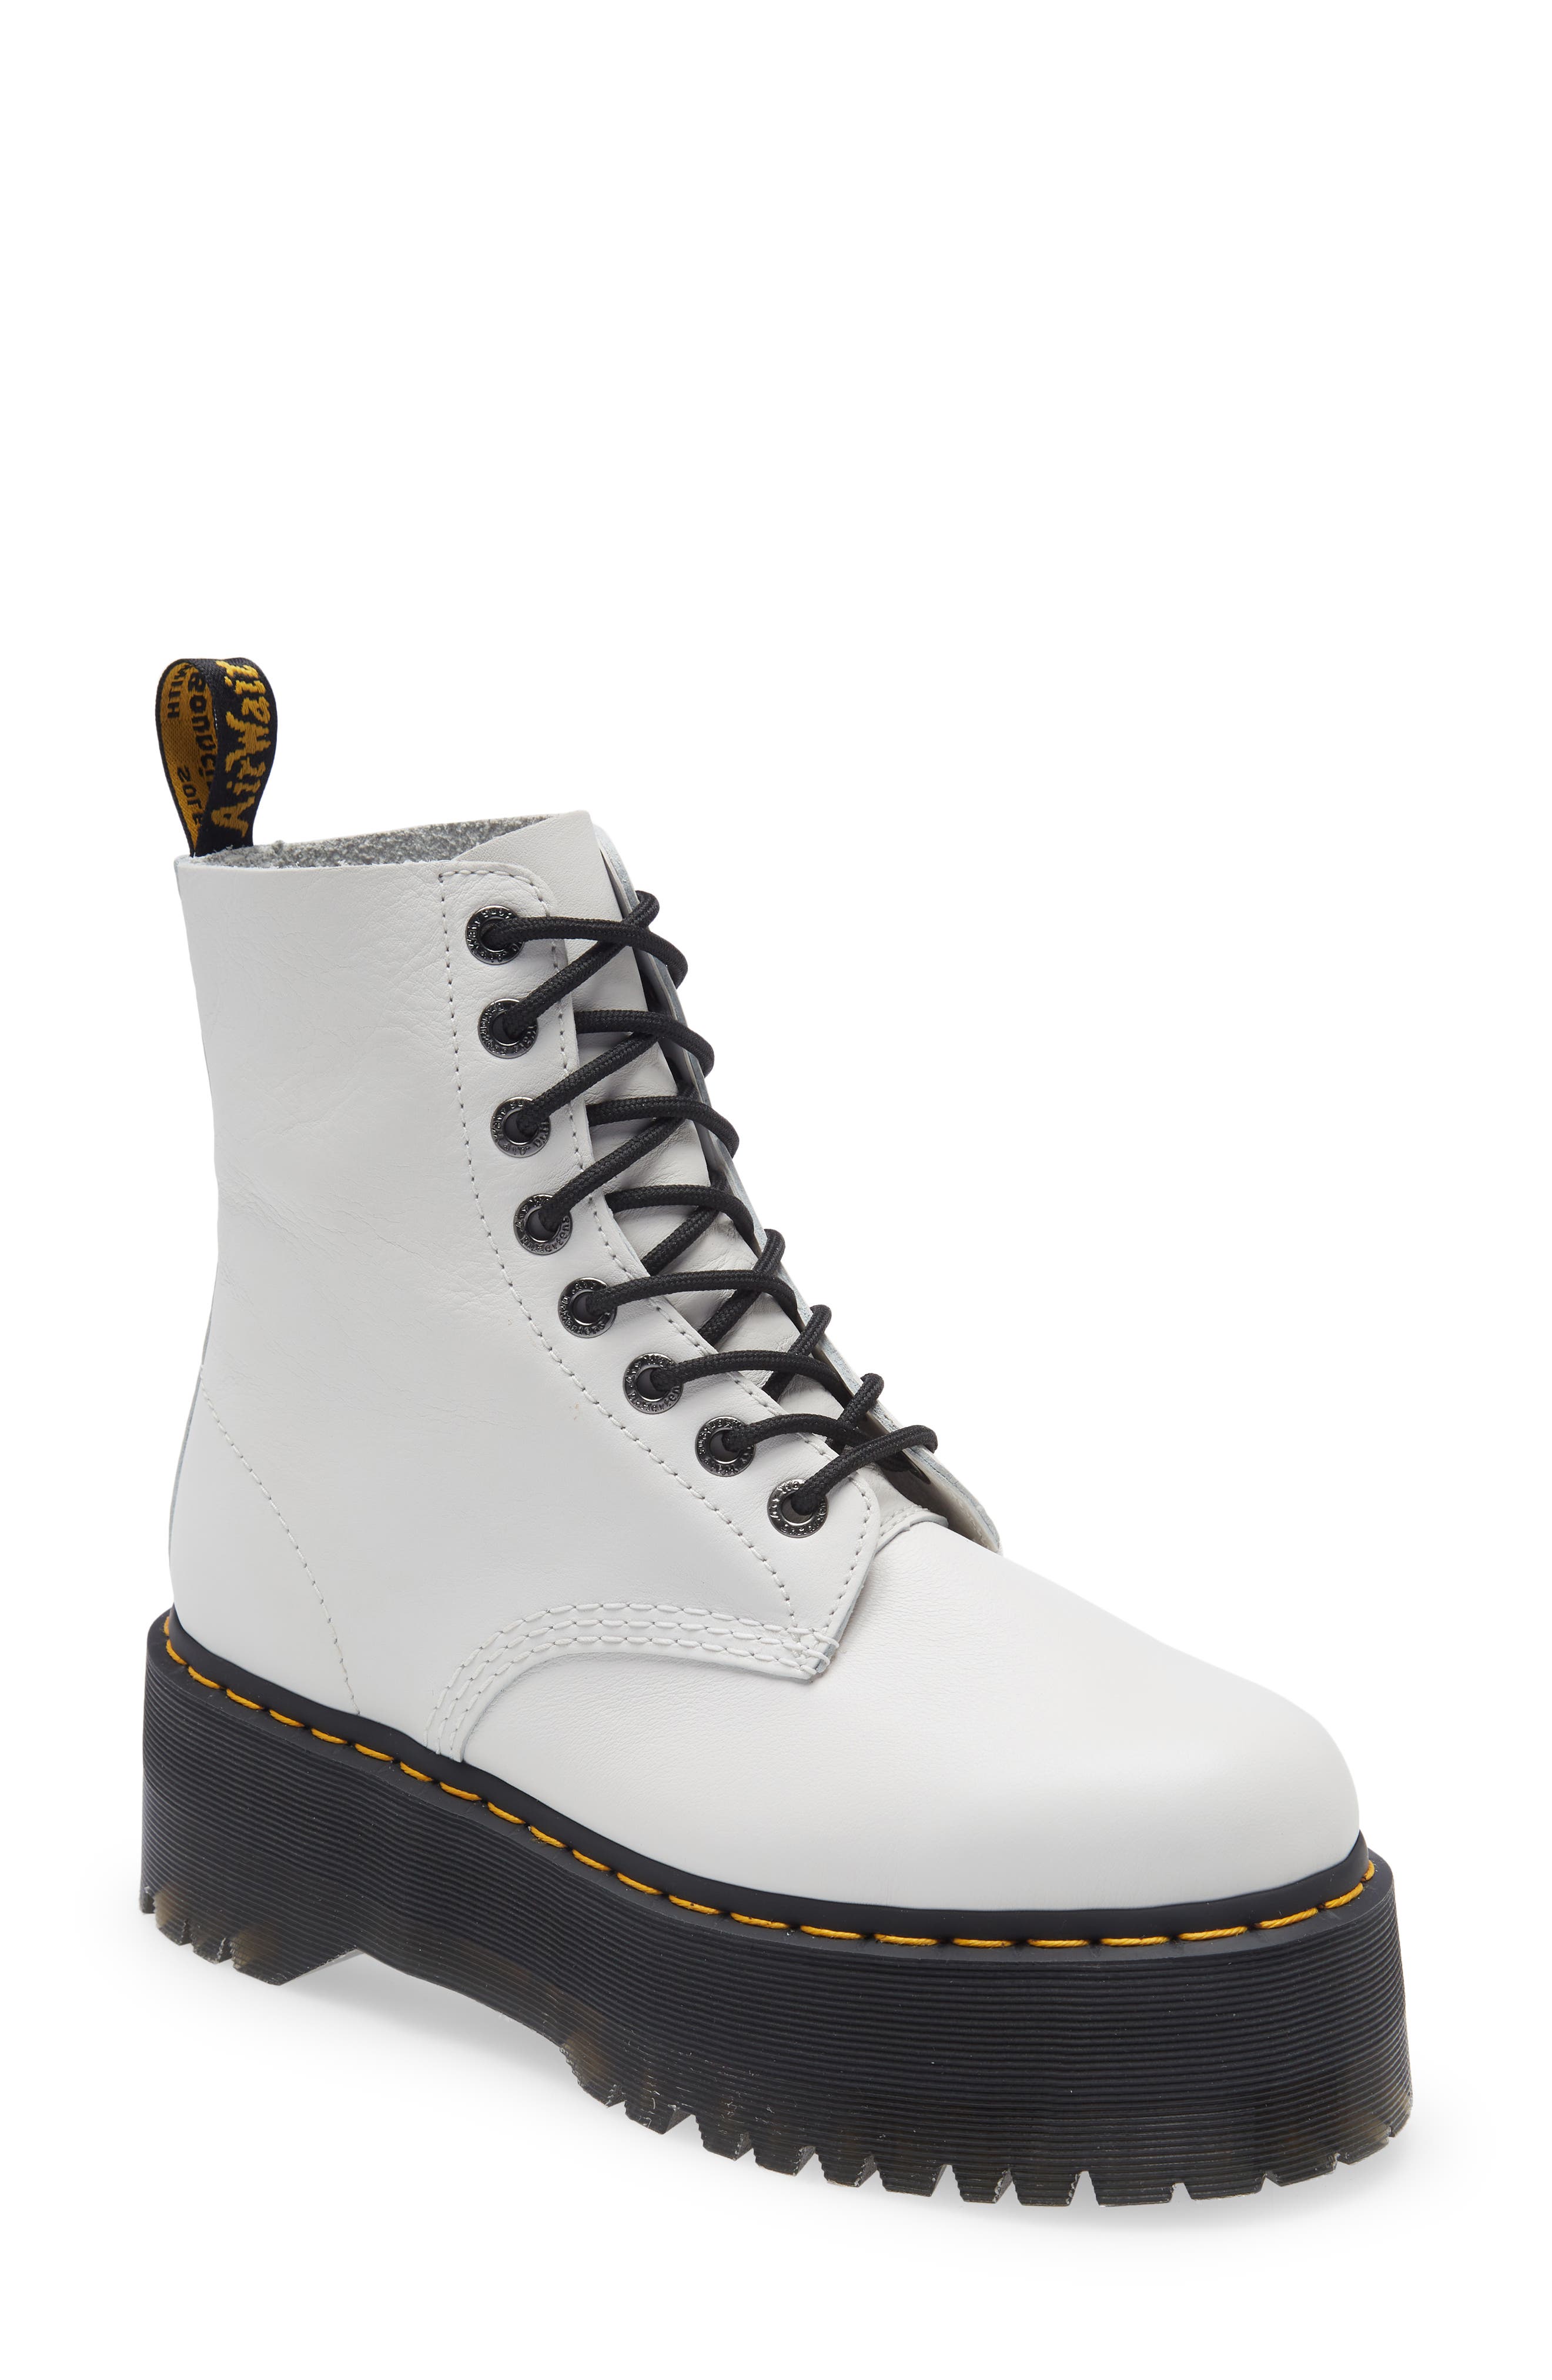 Dr. Martens 1460 Pascal Max Boot in Optical White at Nordstrom, Size 10Us